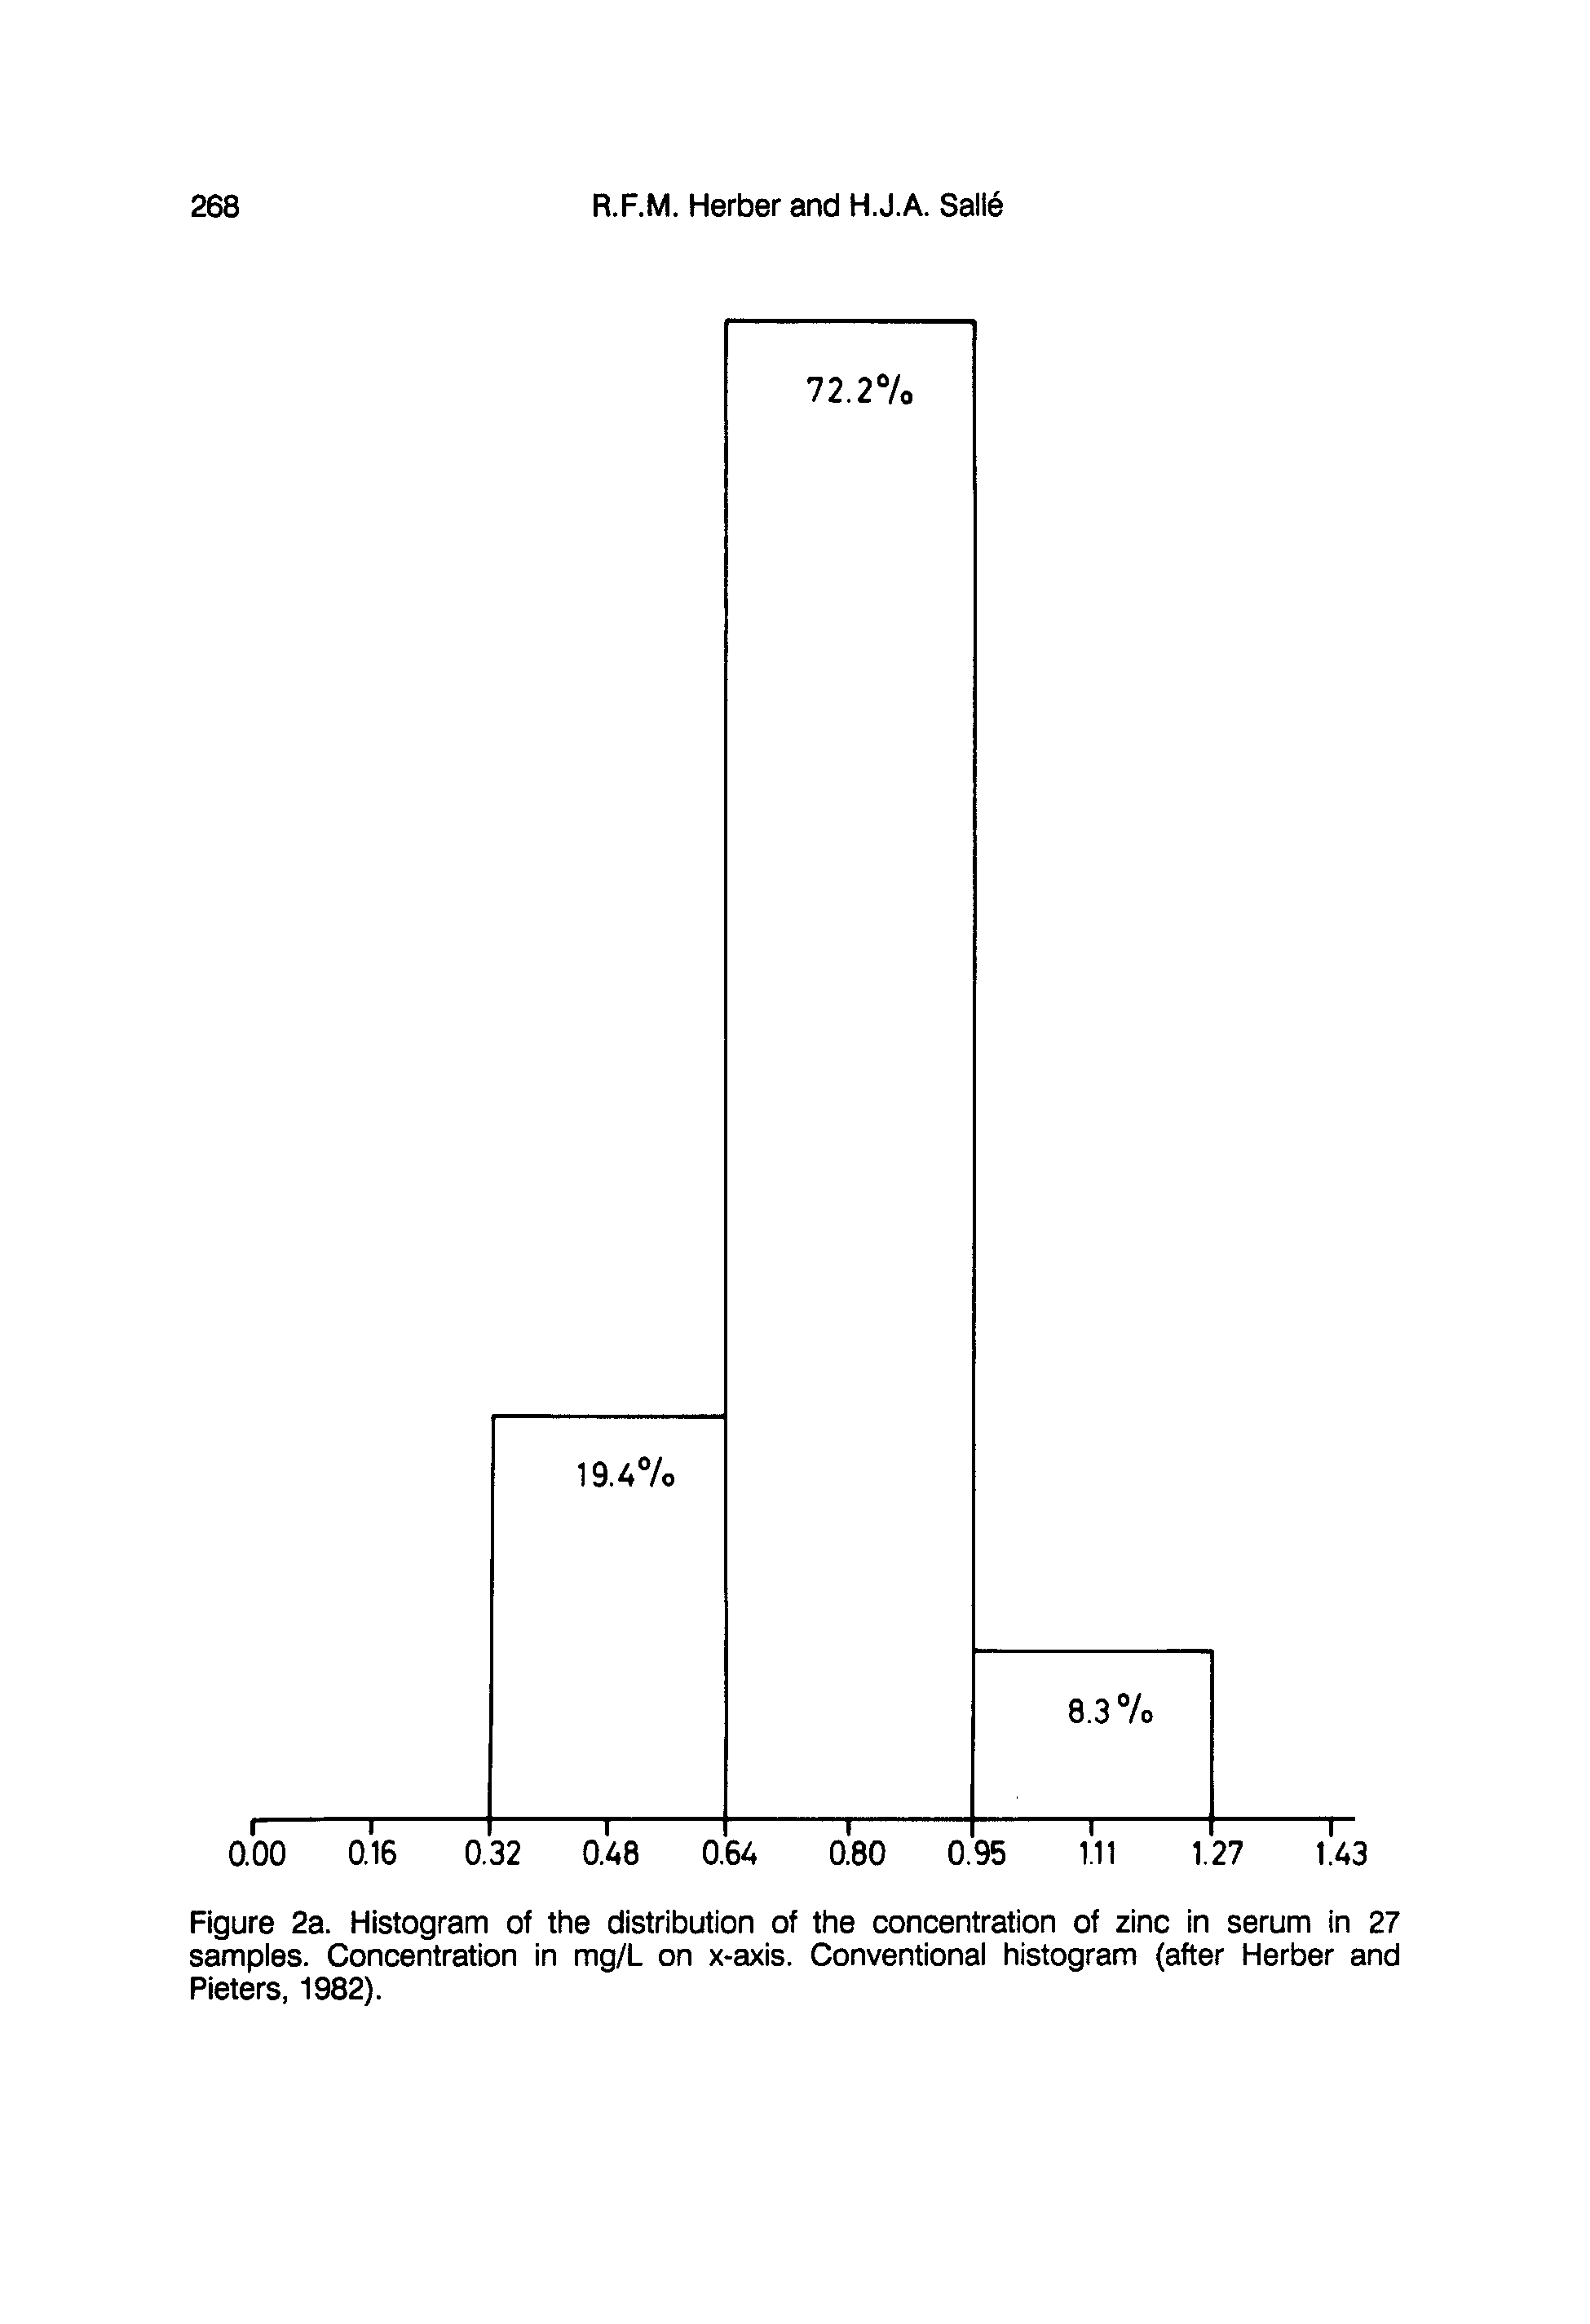 Figure 2a. Histogram of the distribution of the concentration of zinc in serum in 27 samples. Concentration in mg/L on x-axis. Conventional histogram (after Herber and Pieters. 1982).